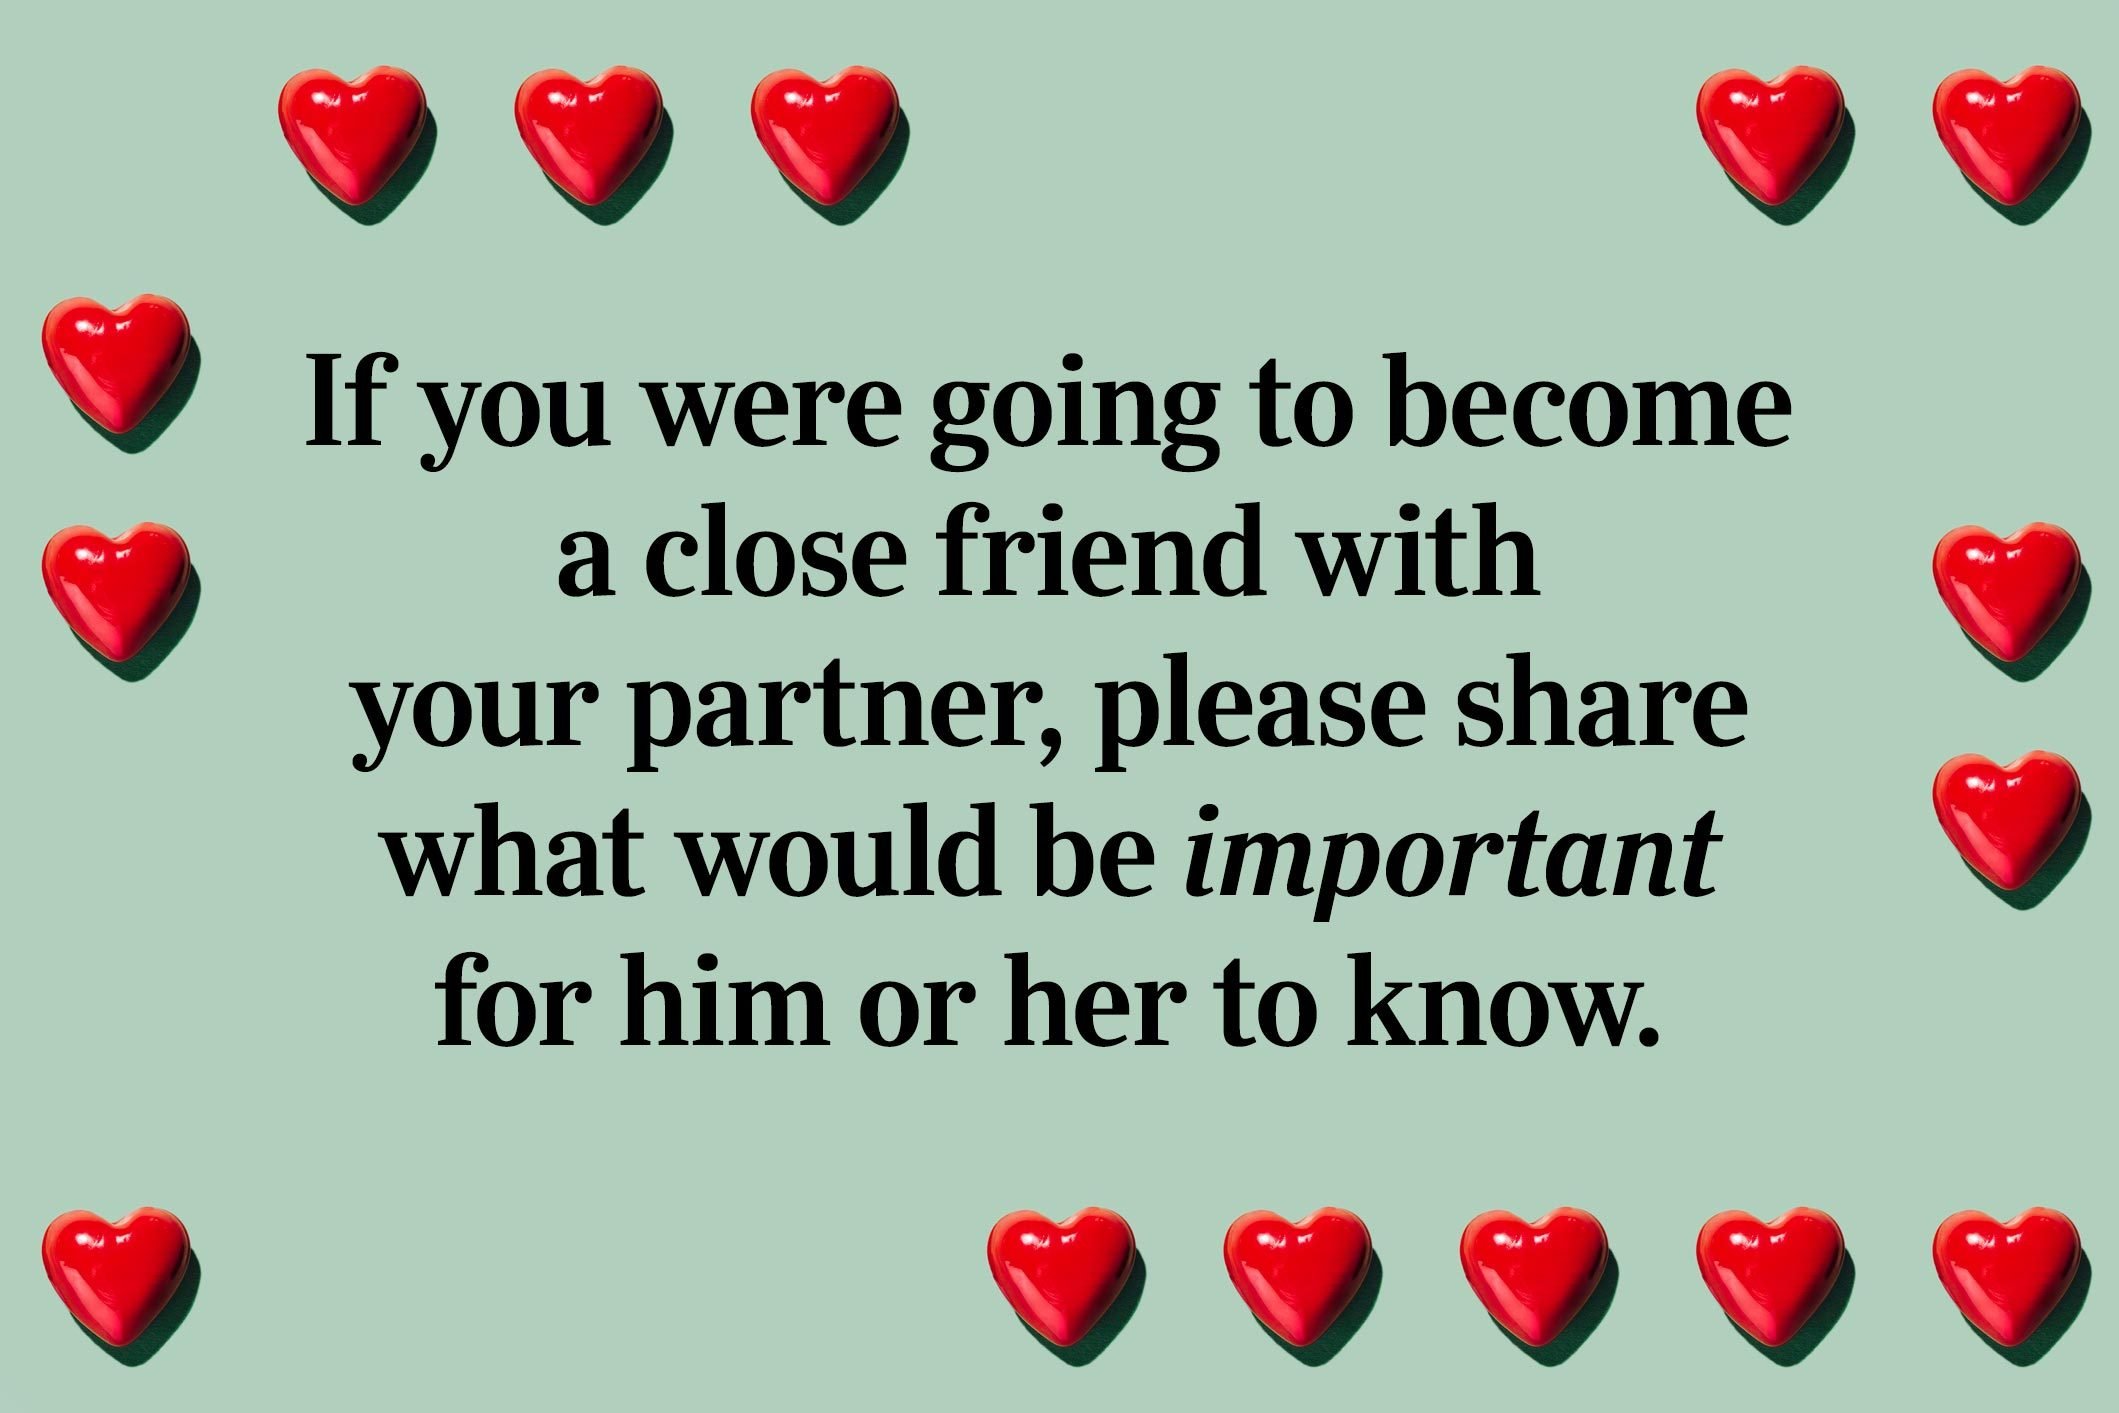 <p>If you were going to become a close friend with your partner, please share what would be important for him or her to know.</p>